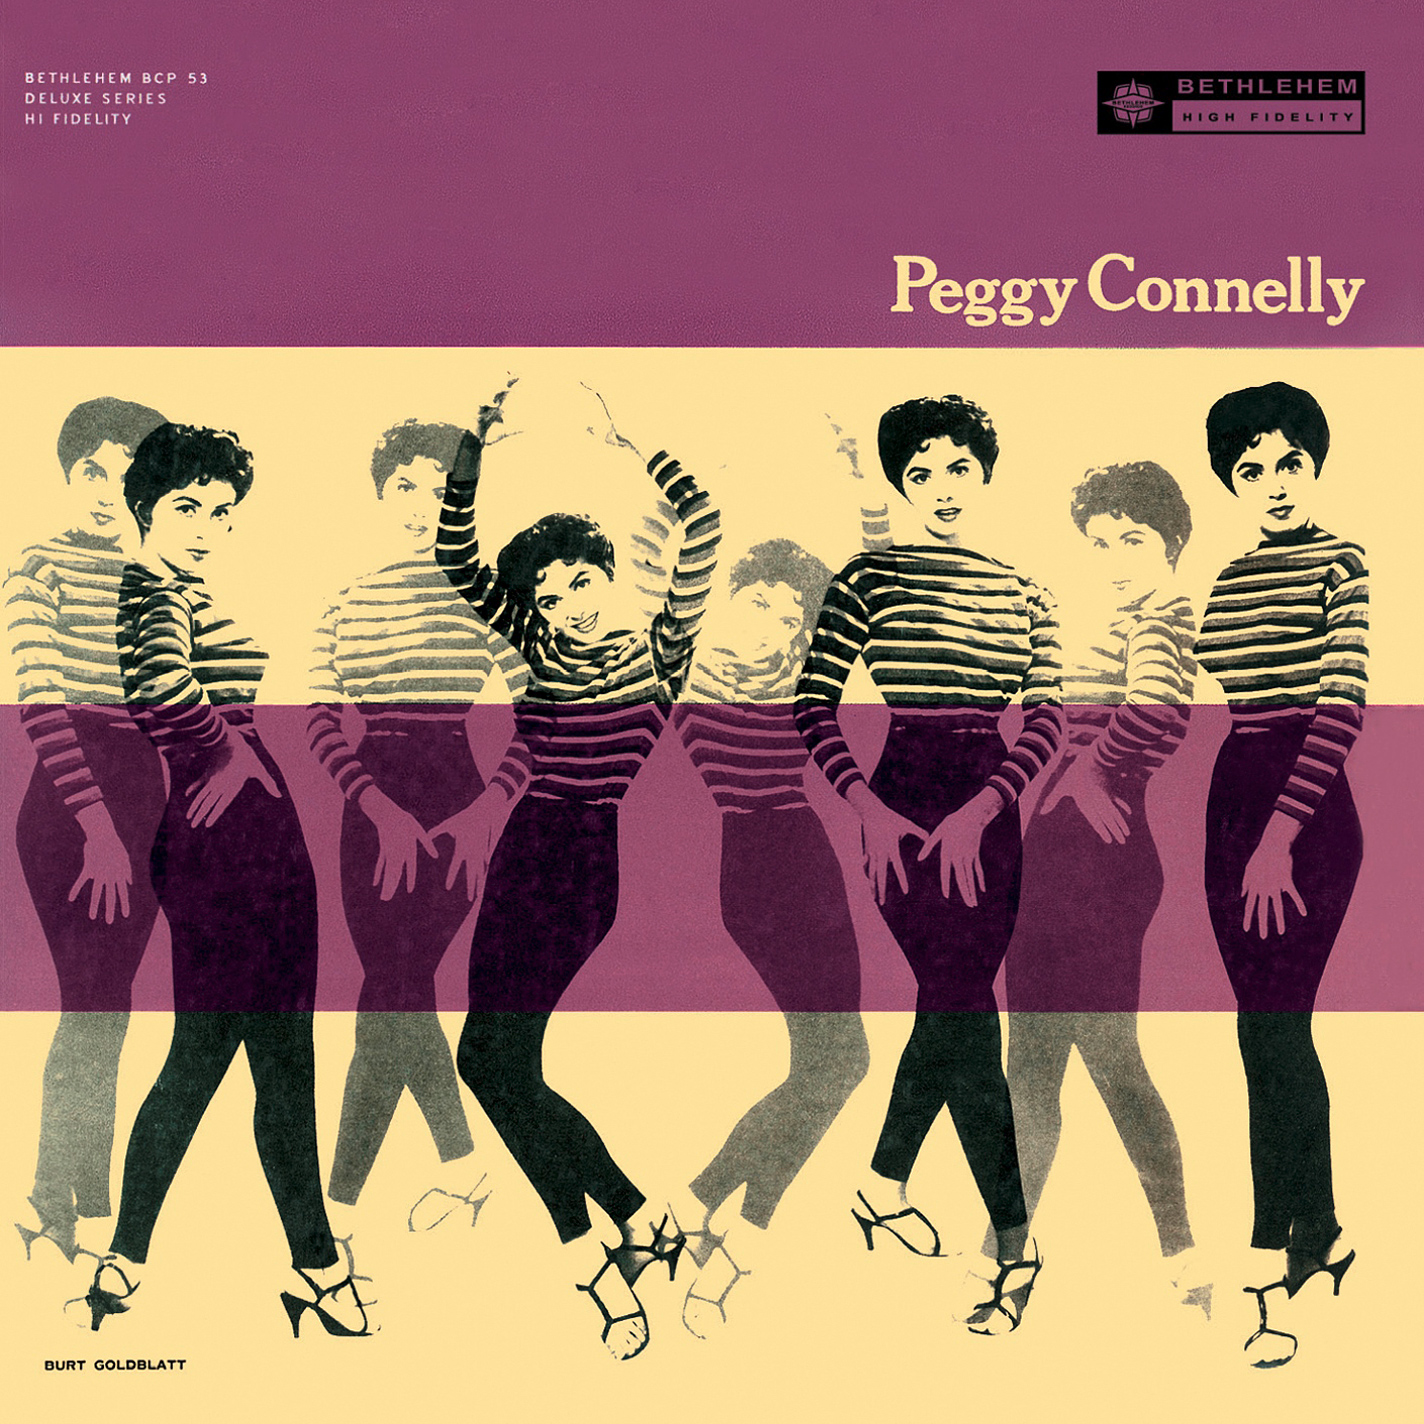 Peggy Connelly – That Old Black Magic (1956/2014) [PrestoClassical FLAC 24bit/96kHz]